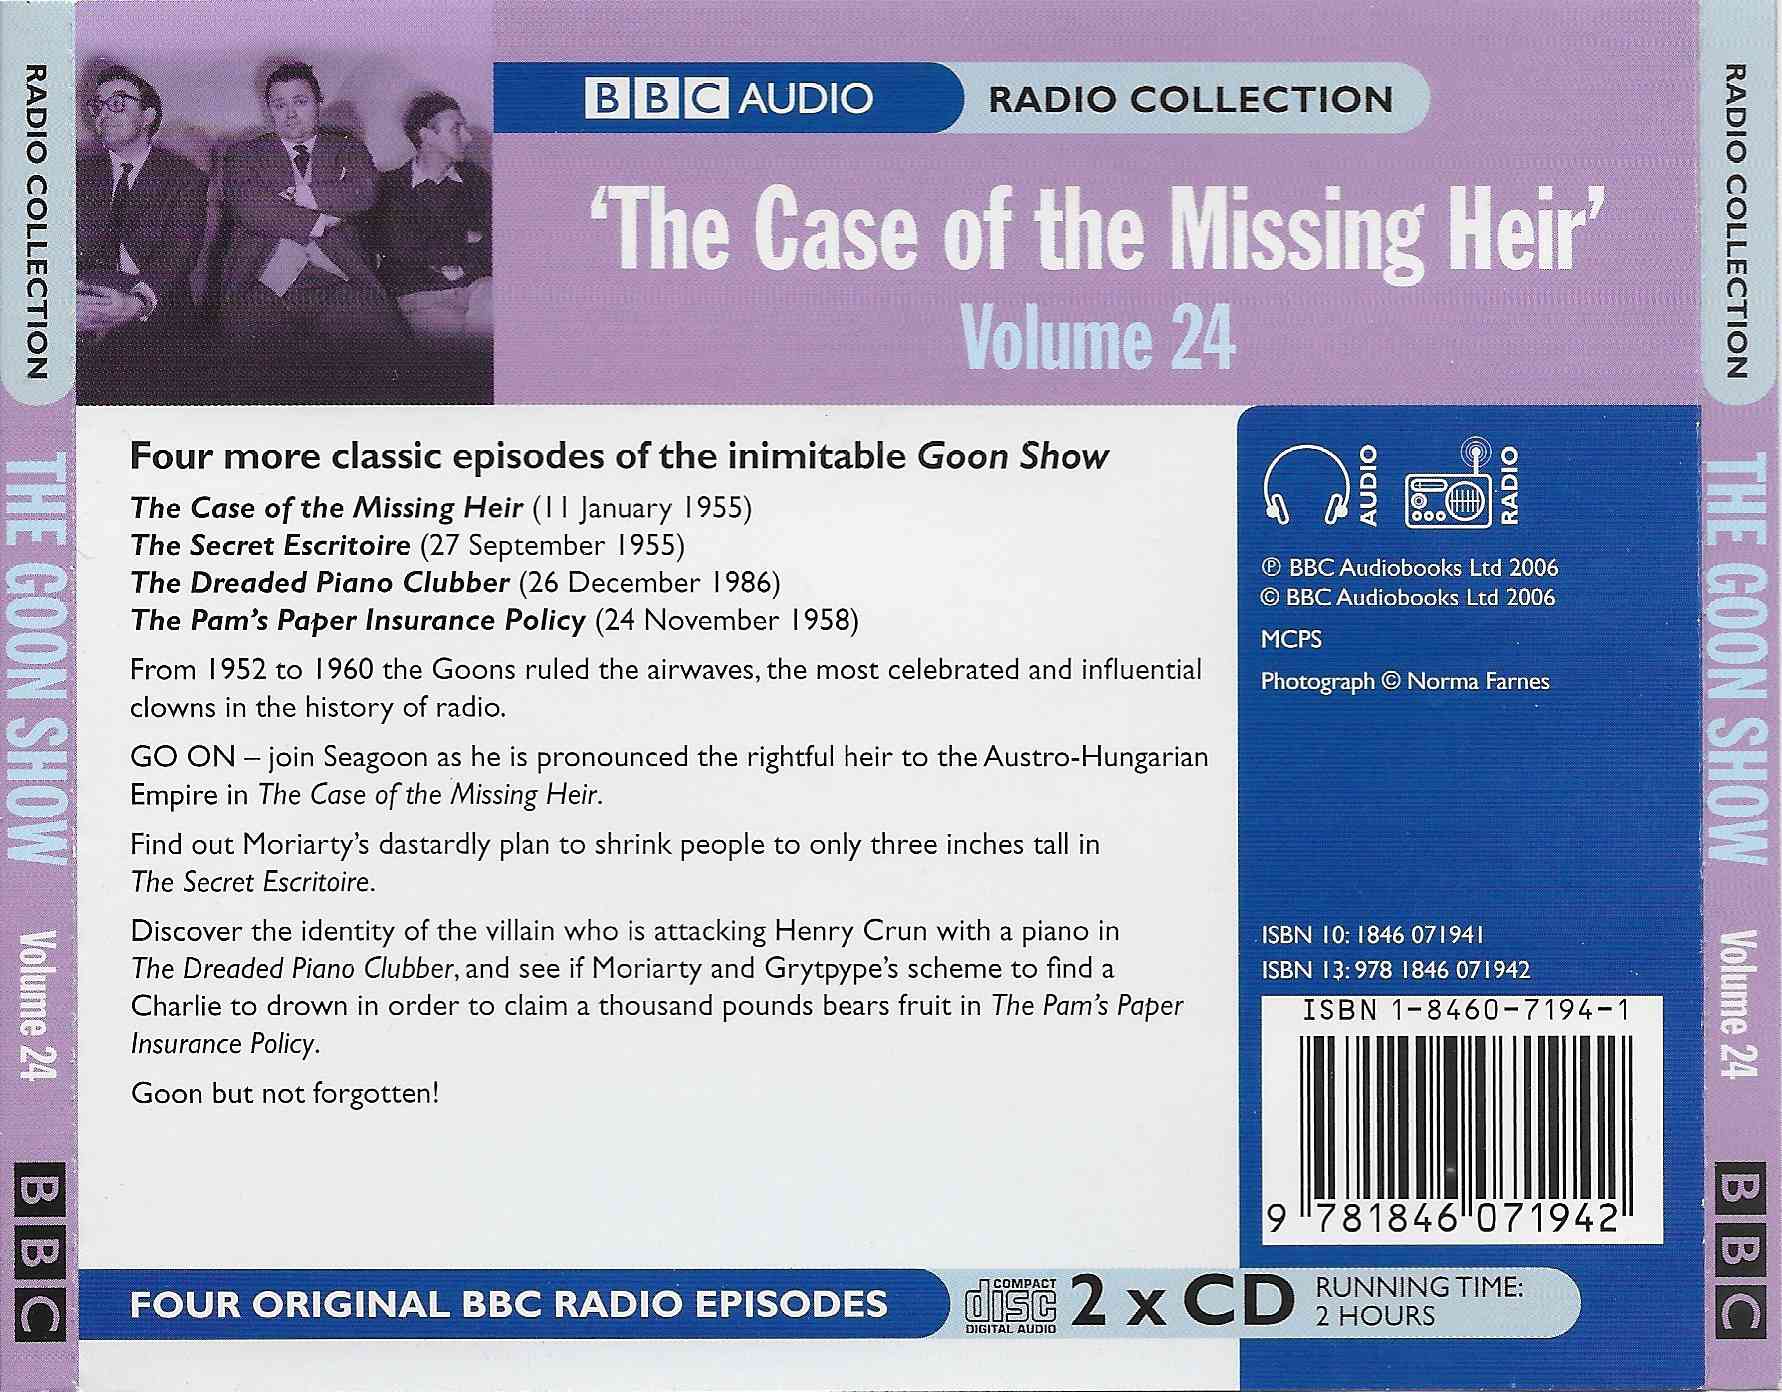 Picture of ISBN 1-8460-7194-1 The Goon Show 24 - The case of the missing heir by artist Spike Milligan / Eric Sykes from the BBC records and Tapes library